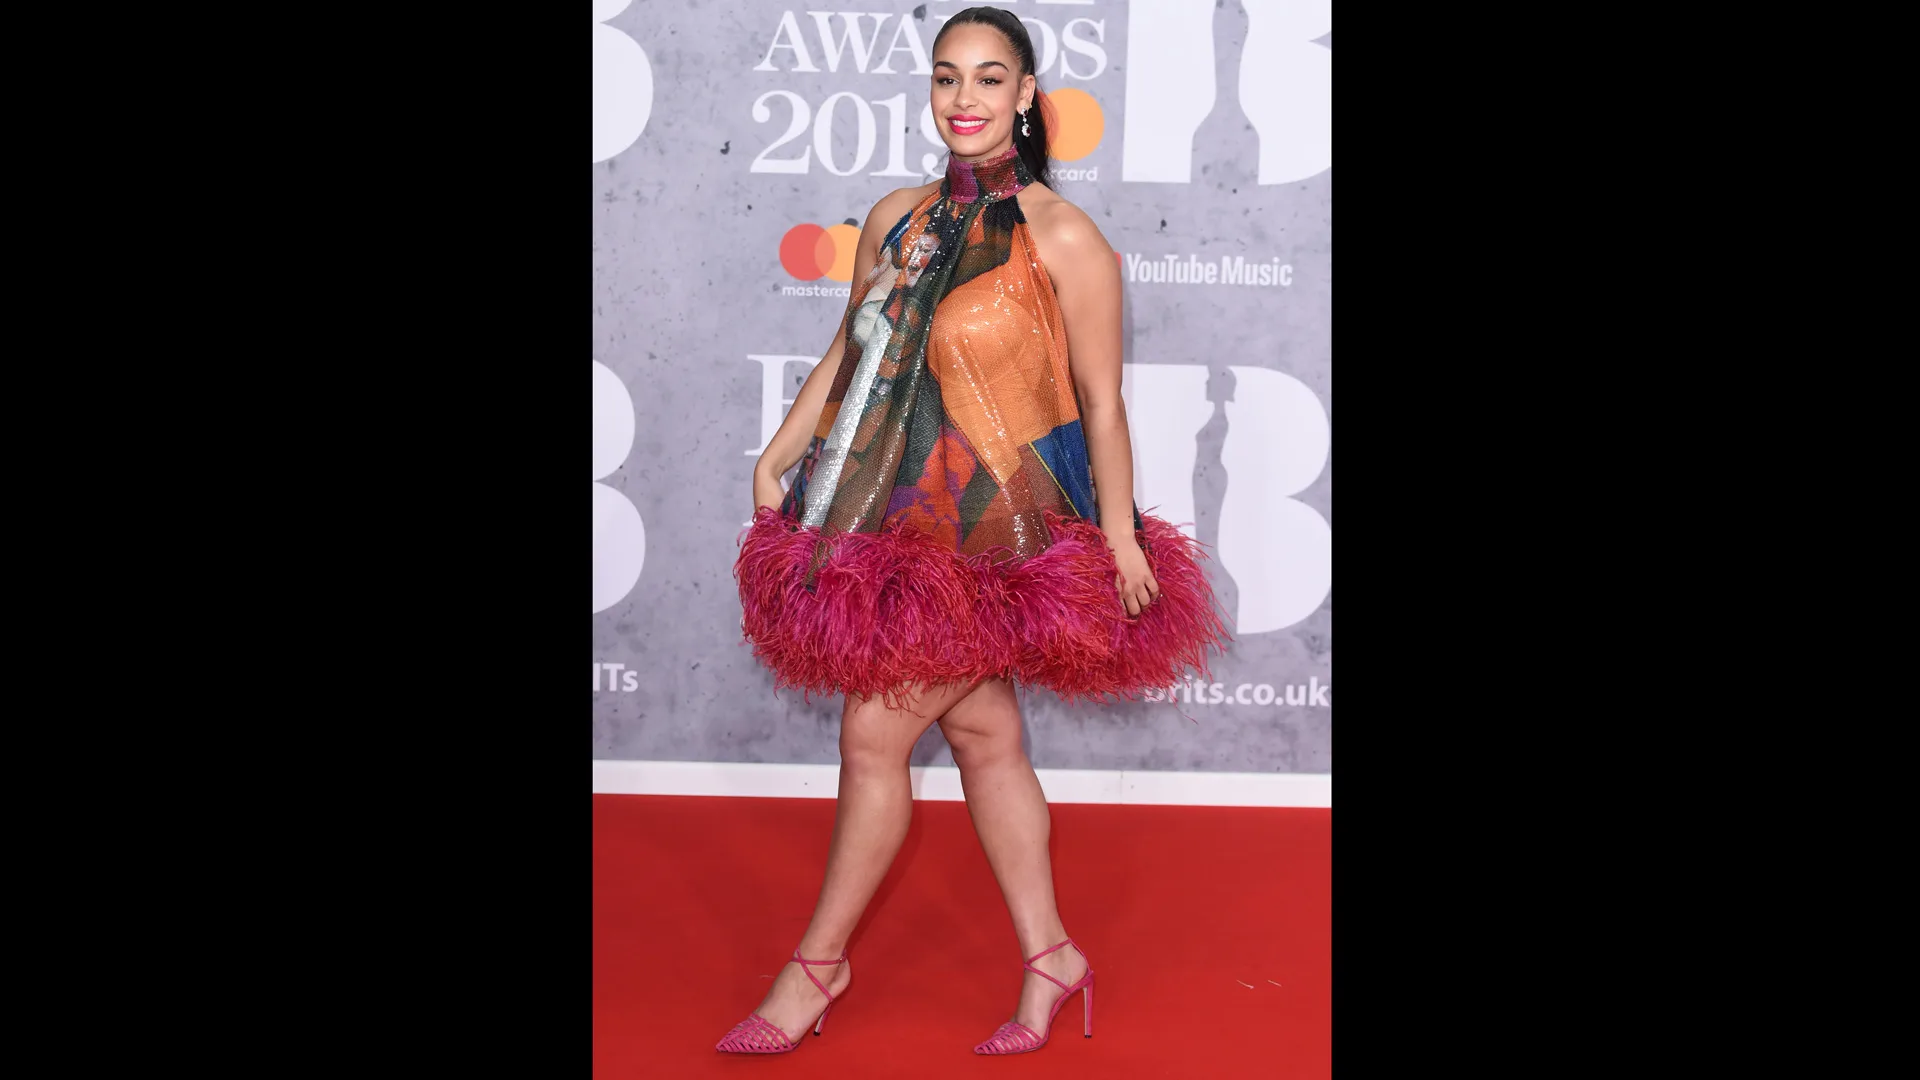 Photograph of Jorja Smith in a multi-coloured dress with red feather trim on the red carpet at the BRIT Awards